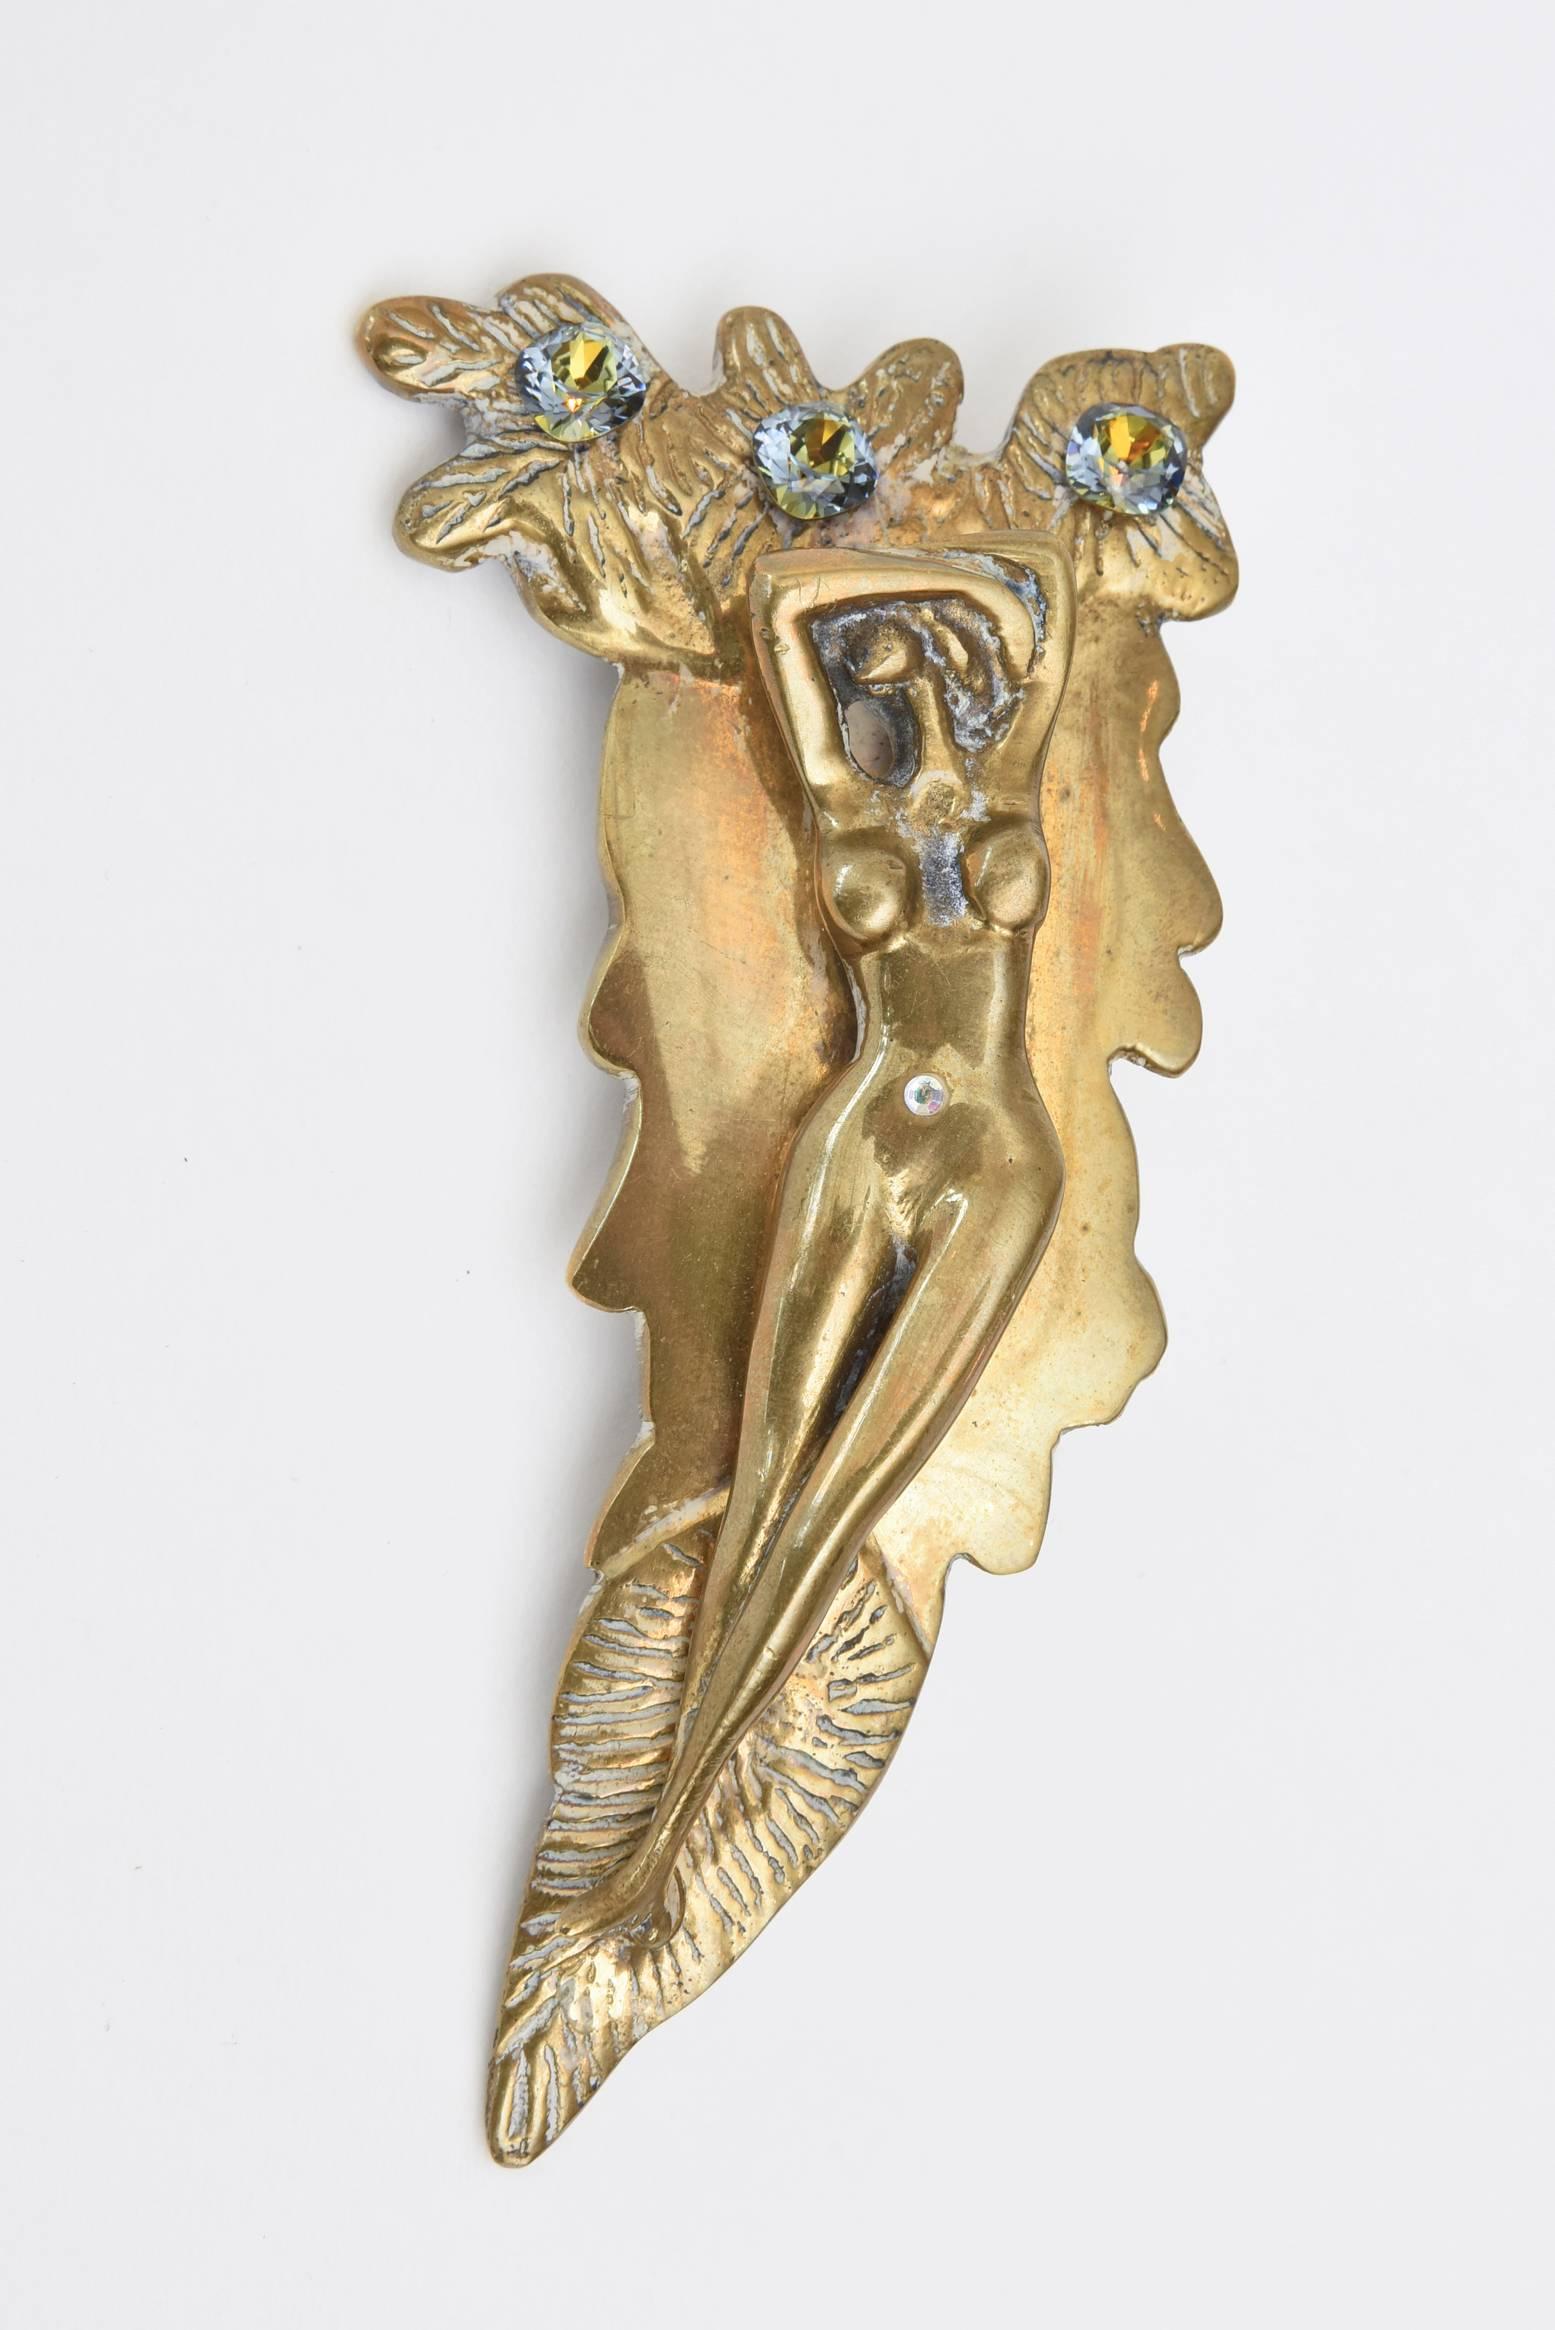 This studio one of a kind large and bold bronze sculptural designed belt buckle by Perella is most likely Italian. It has has boris aurelius glass stones with a reclining nude figure. It is most unusual and sensual. This is art and sculpture in one.